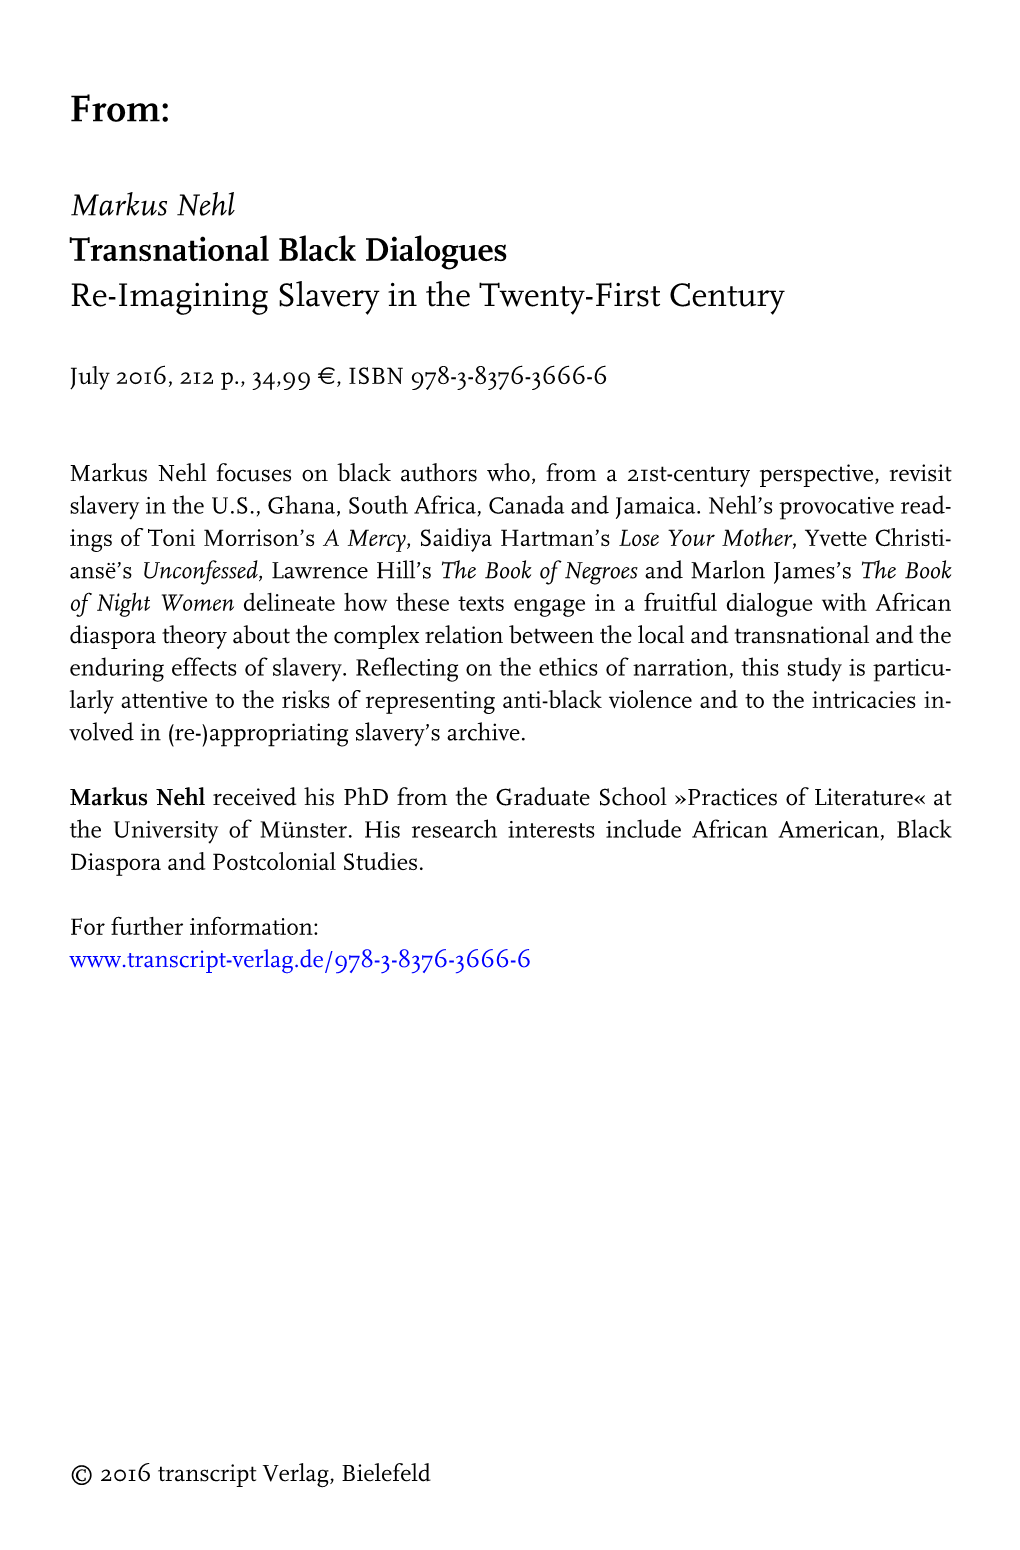 Transnational Black Dialogues Re-Imagining Slavery in the Twenty-First Century